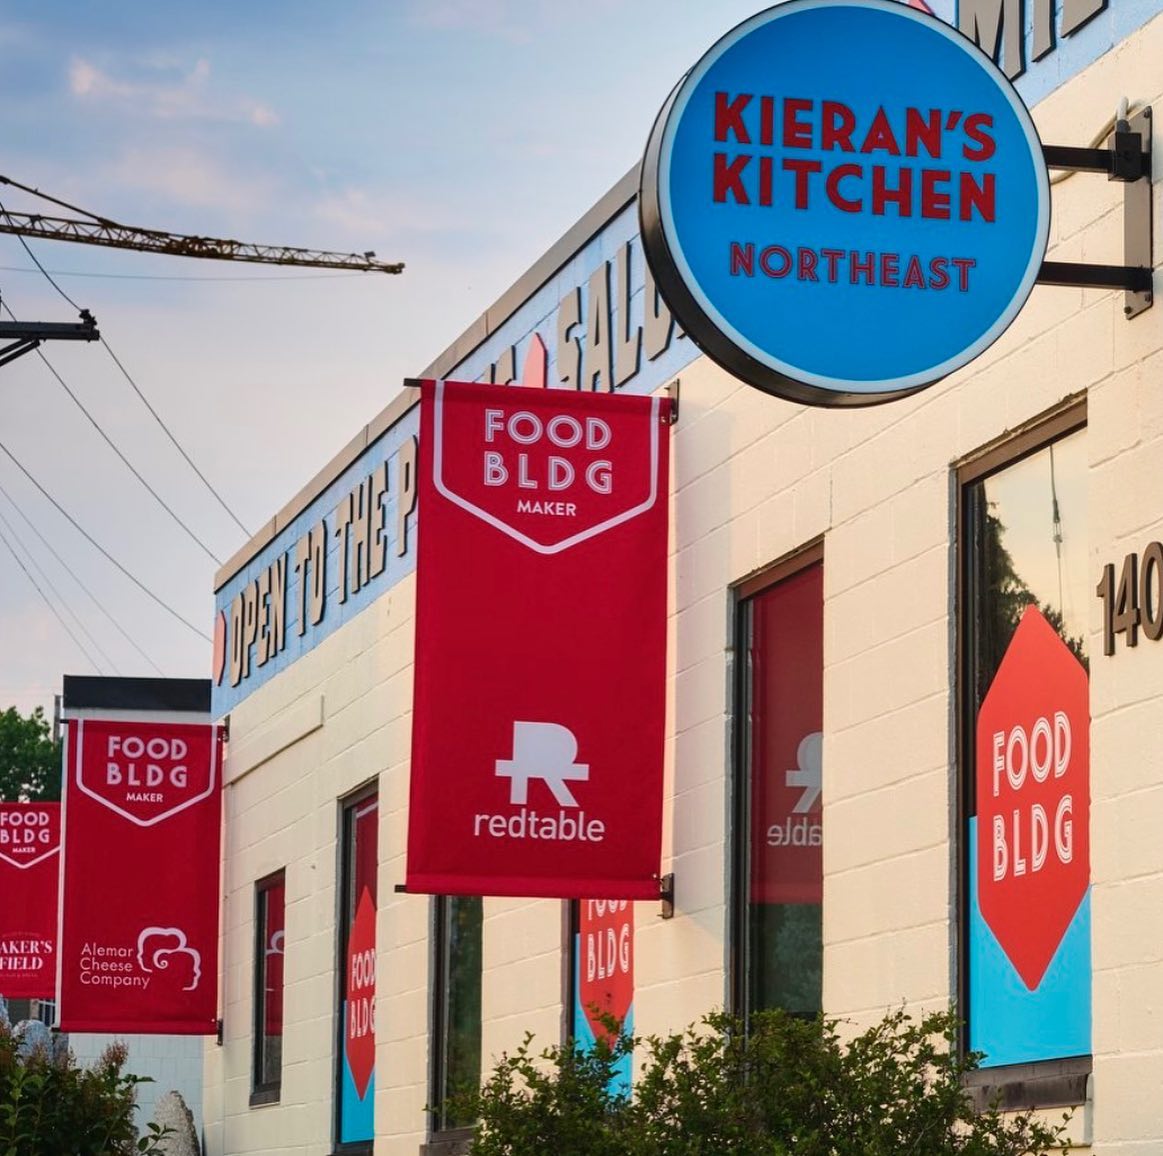 Meet Upstream Partner: @kieranskitchenatfoodbldg FOOD BUILDING connects farmers, makers, purveyors, and eaters in Minnesota’s community of food. As an urban food production hub, FOOD BUILDING houses three artisan food businesses—Lowry Hill Provisions, Baker's Field Flour & Bread, and Alemar Cheese Company—that transform Minnesota’s quintessential agricultural commodities—pork, grain, and milk—into award-winning, nationally-known products that are delicious points of hometown pride.Join us for a special video Voices of Upstream for a conversation with Food Building founder Kieran Folliard about how this iconic Minnesotan cares for our natural places by keeping food local, nurturing producers and growers and celebrating the community building that happens over good food.Link in bio!#mnupstream #lovewhereyoulive #upstreamminnesota #explorepage #exploremn #minnesota #minnesotafood #minnesotafoodie — from Instagram